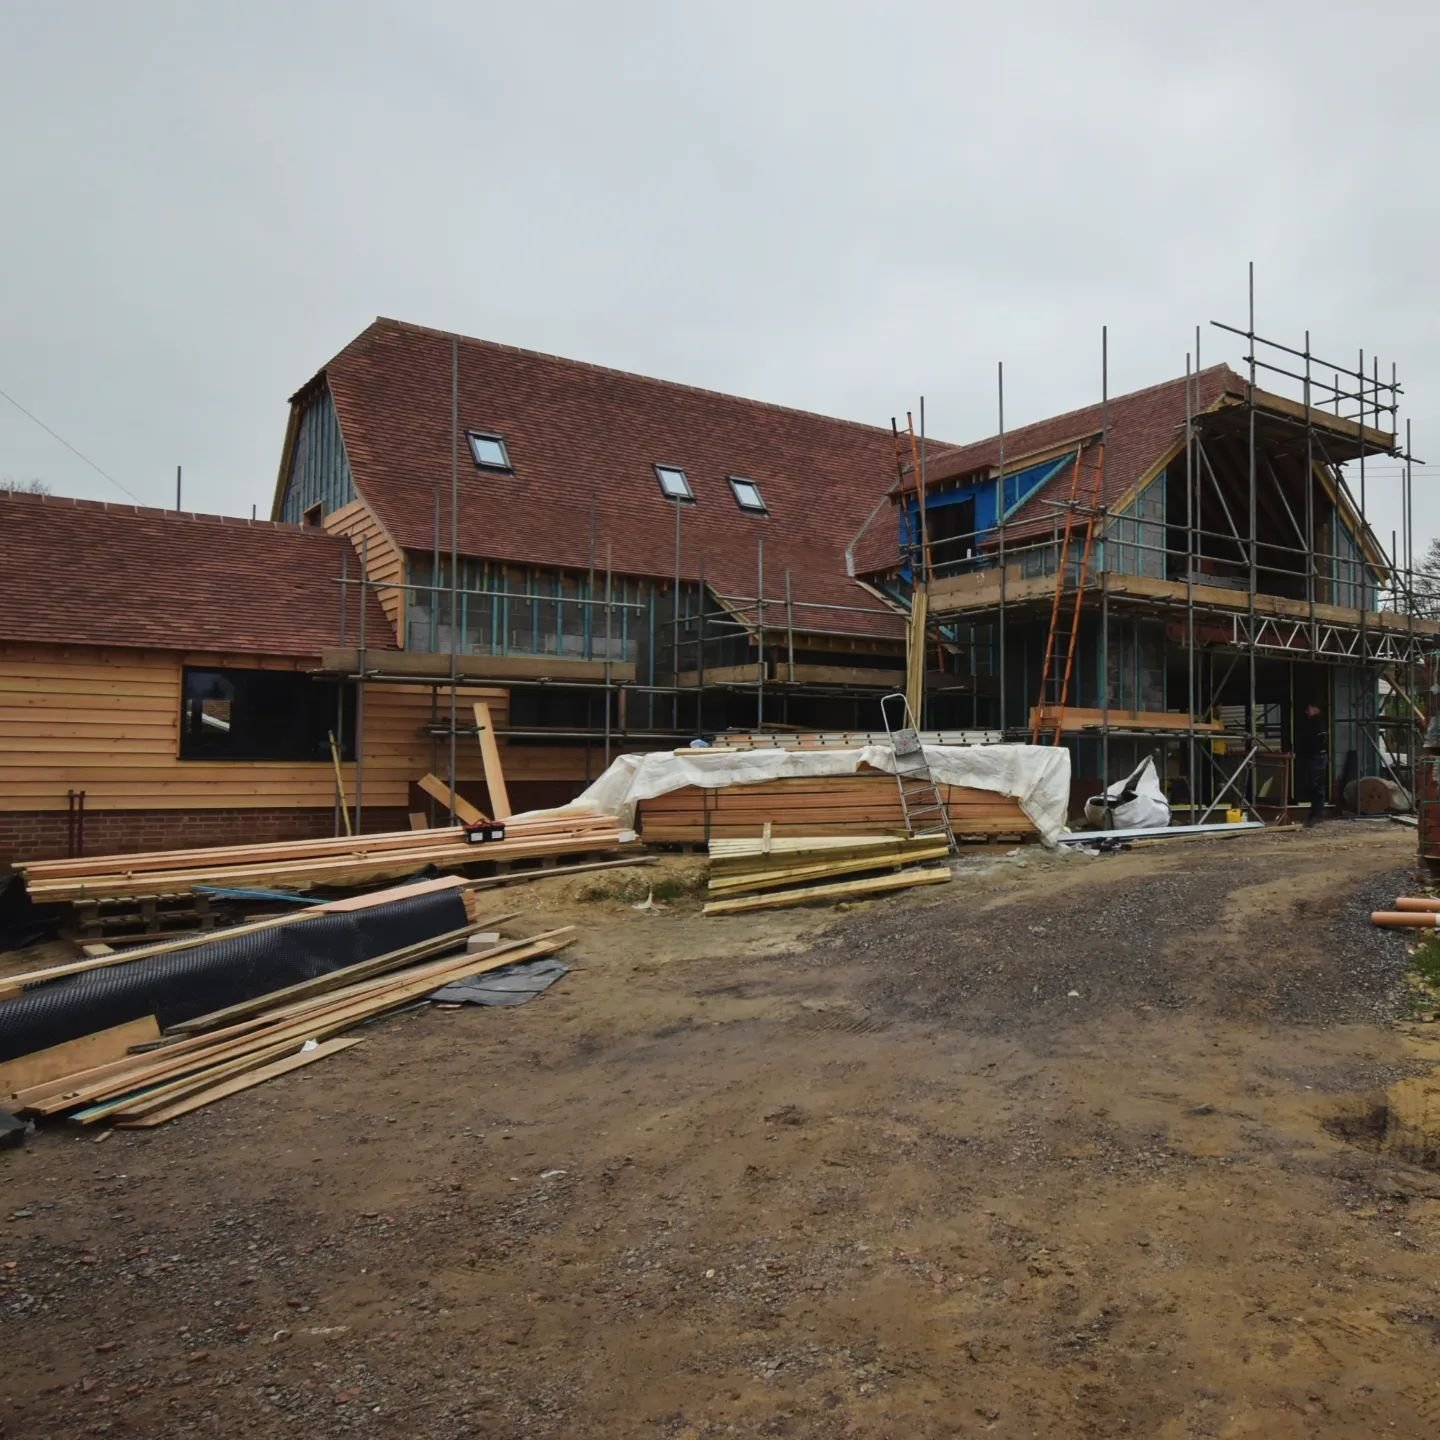 Blaxwell barns progression on site. Swipe to see what the barn looked like before the work commenced. This once derelict heritage asset was about to fall down before the client approached us to turn it into their residential dwelling. It's now going 